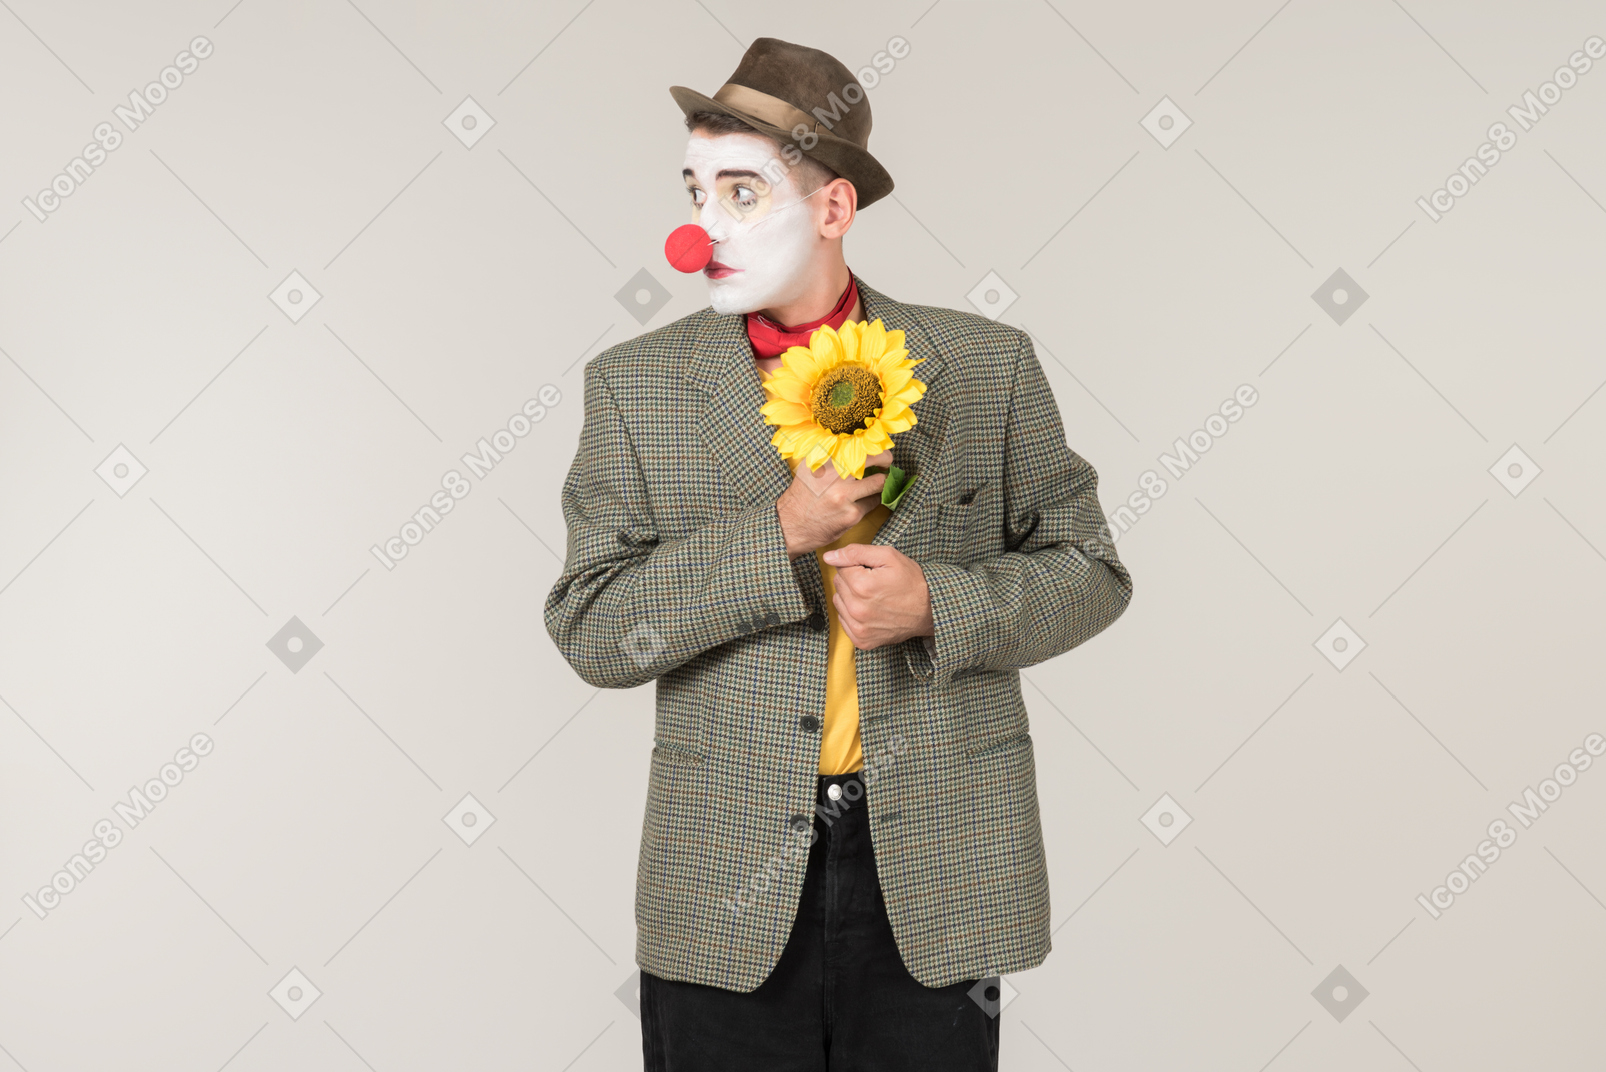 Male clown putting a sunflower out of the jacket